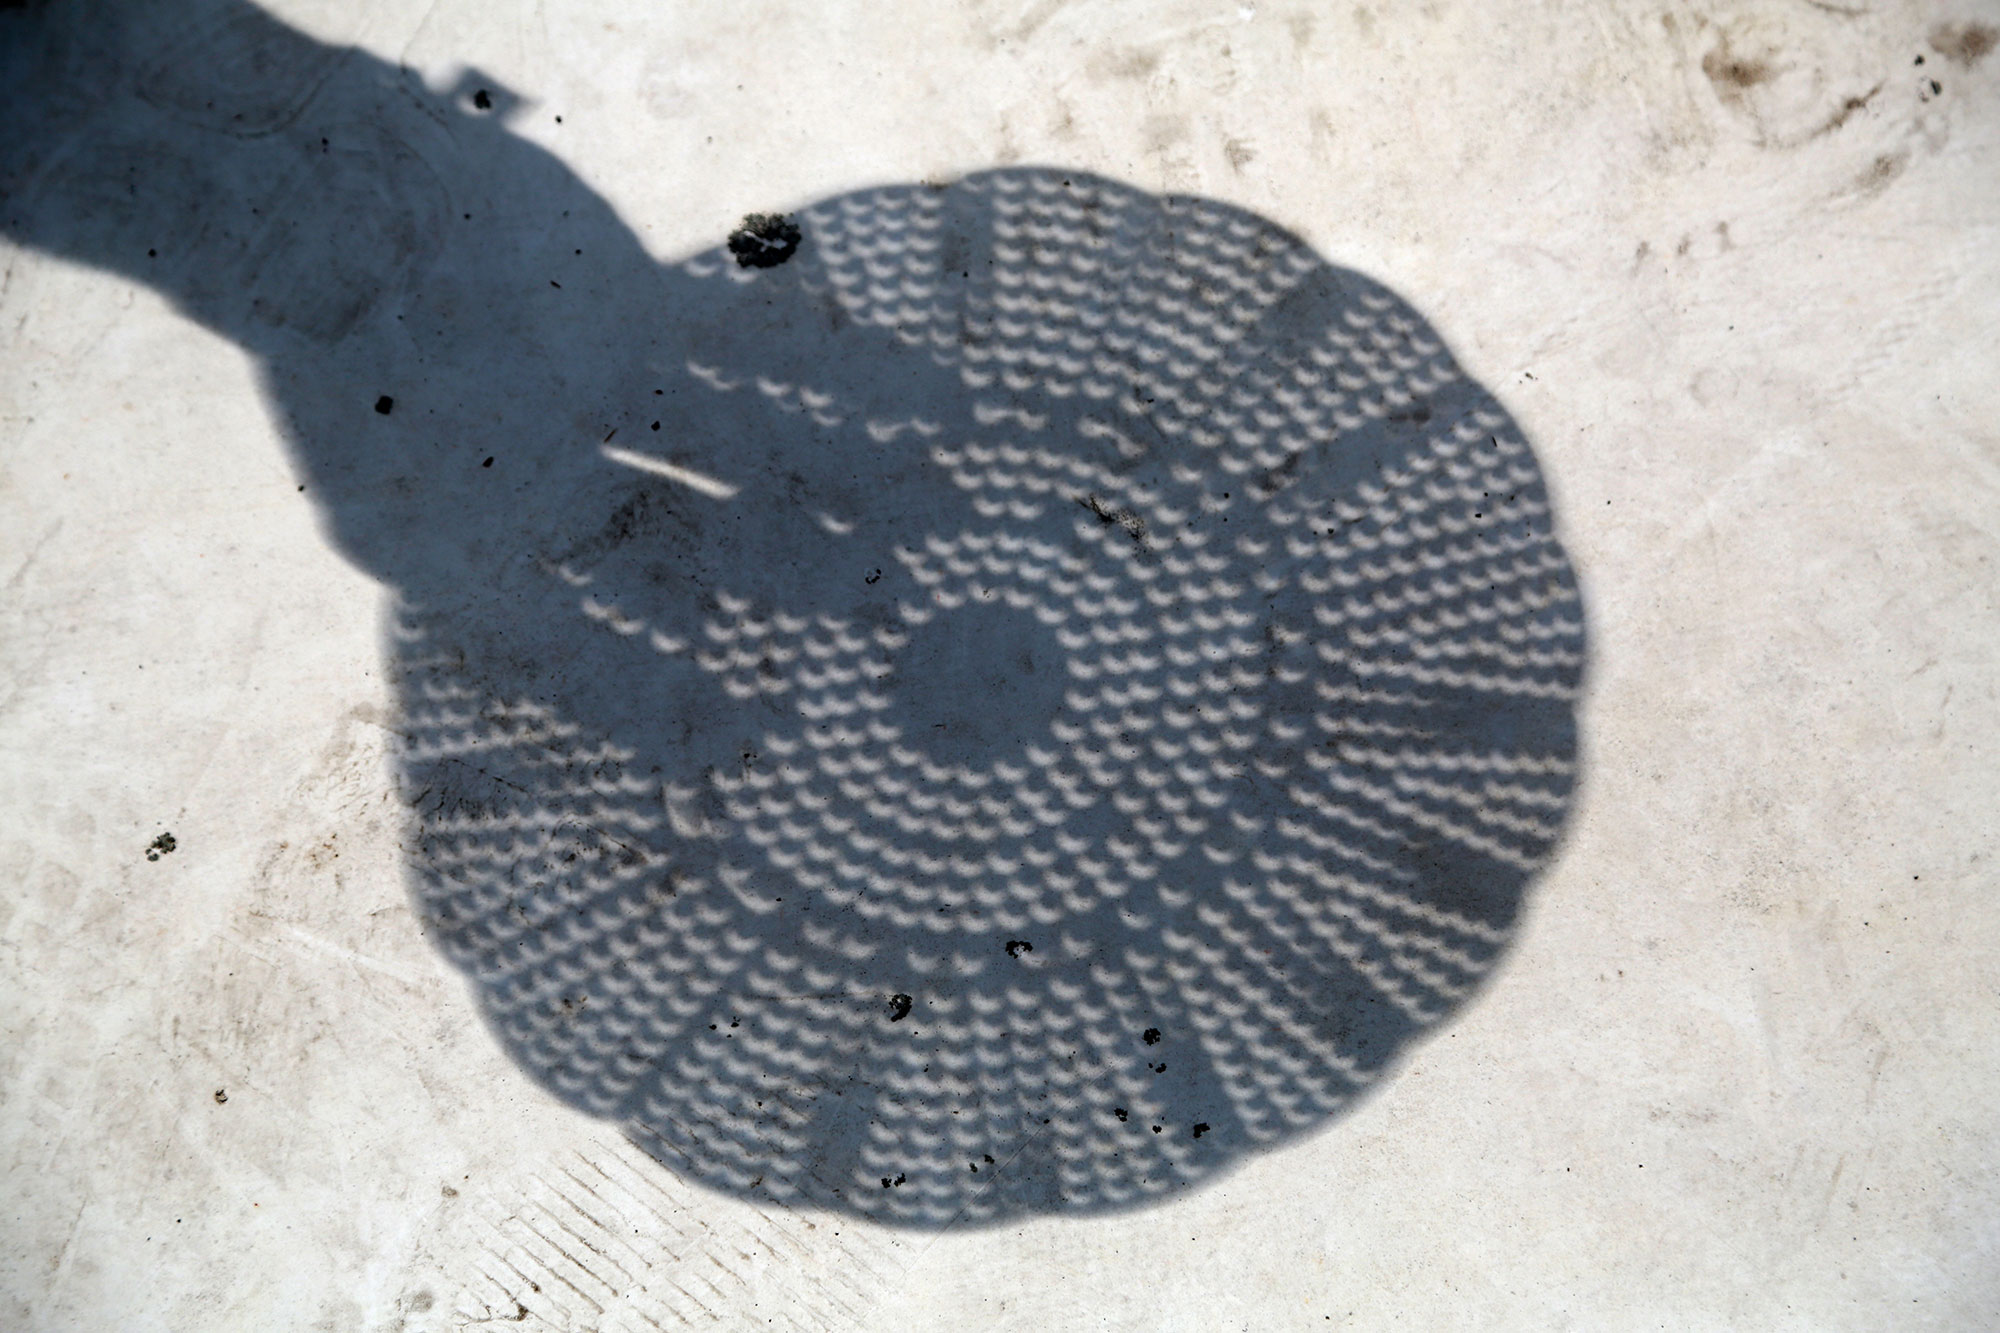 A shadow of a hand and a kitchen colander (which appears as a circle with holes) appears on a white surface. Close inspection reveals that where sunlight passes through the holes of the colander, small crescent shapes appear.